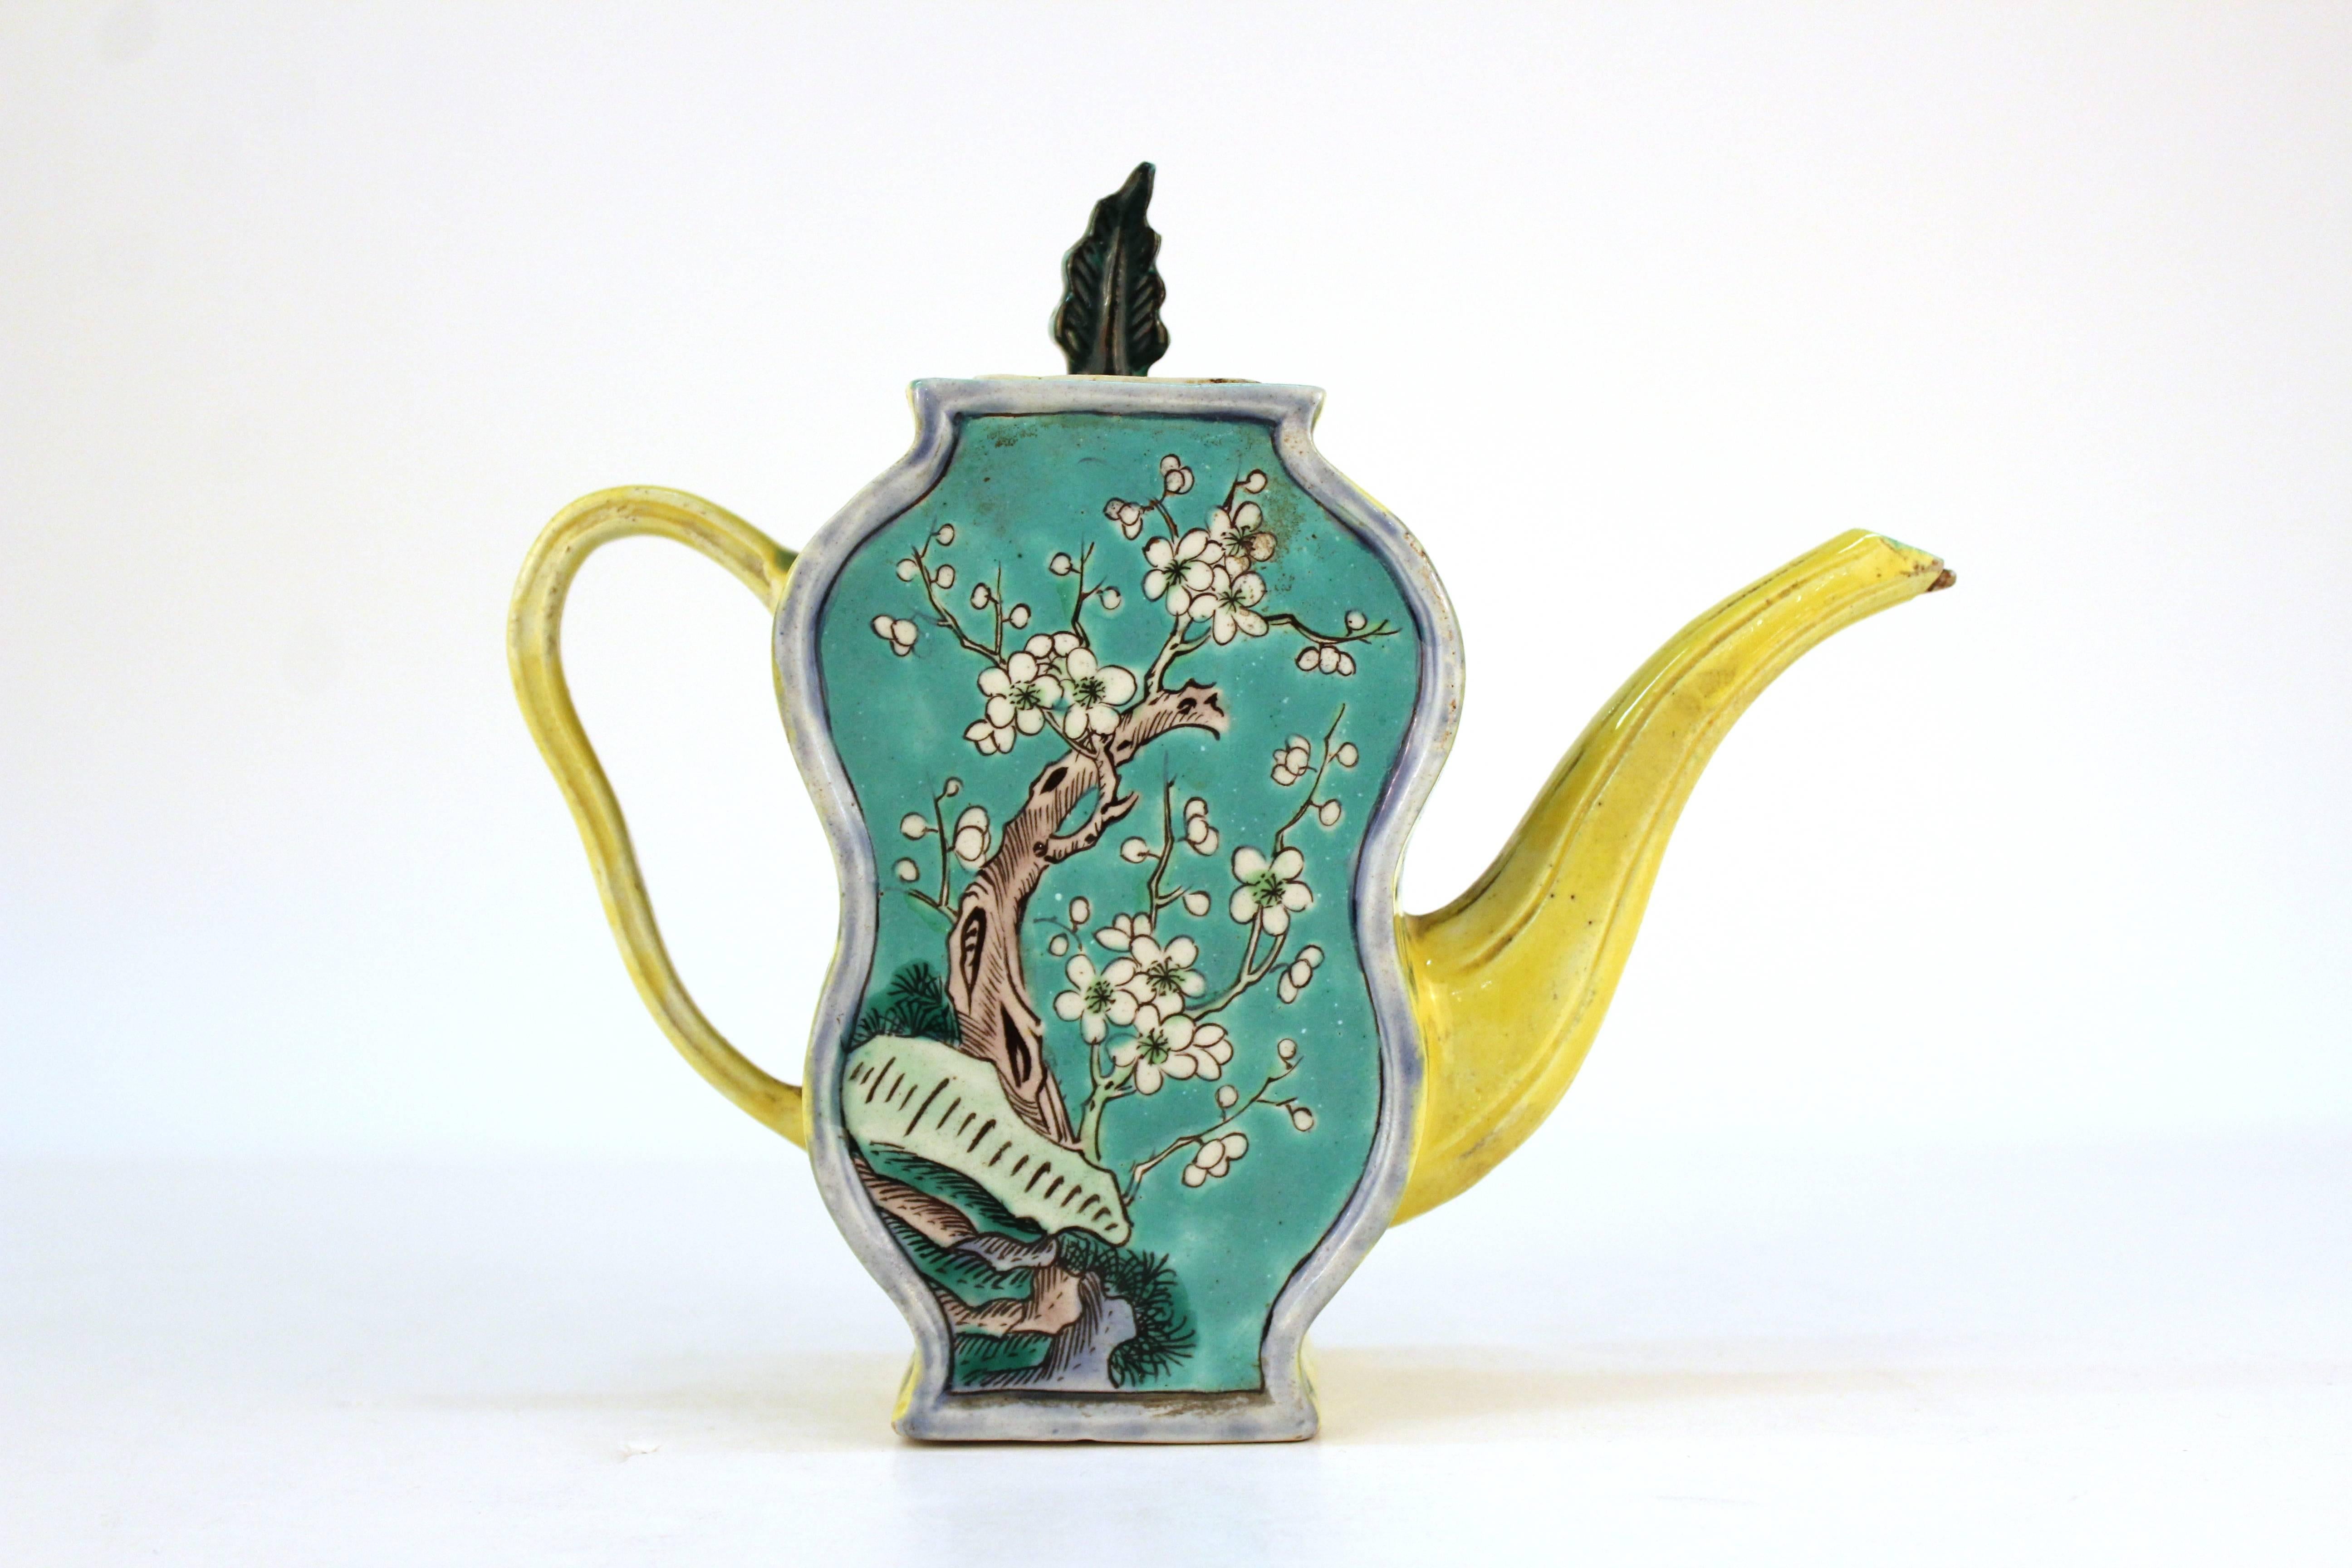 Chinese porcelain teapot with a warrior and florals against a vivid aqua and bright yellow background and topped with a tea leaf. Marked China on the bottom. Chips to the spout and lid but in overall good condition.